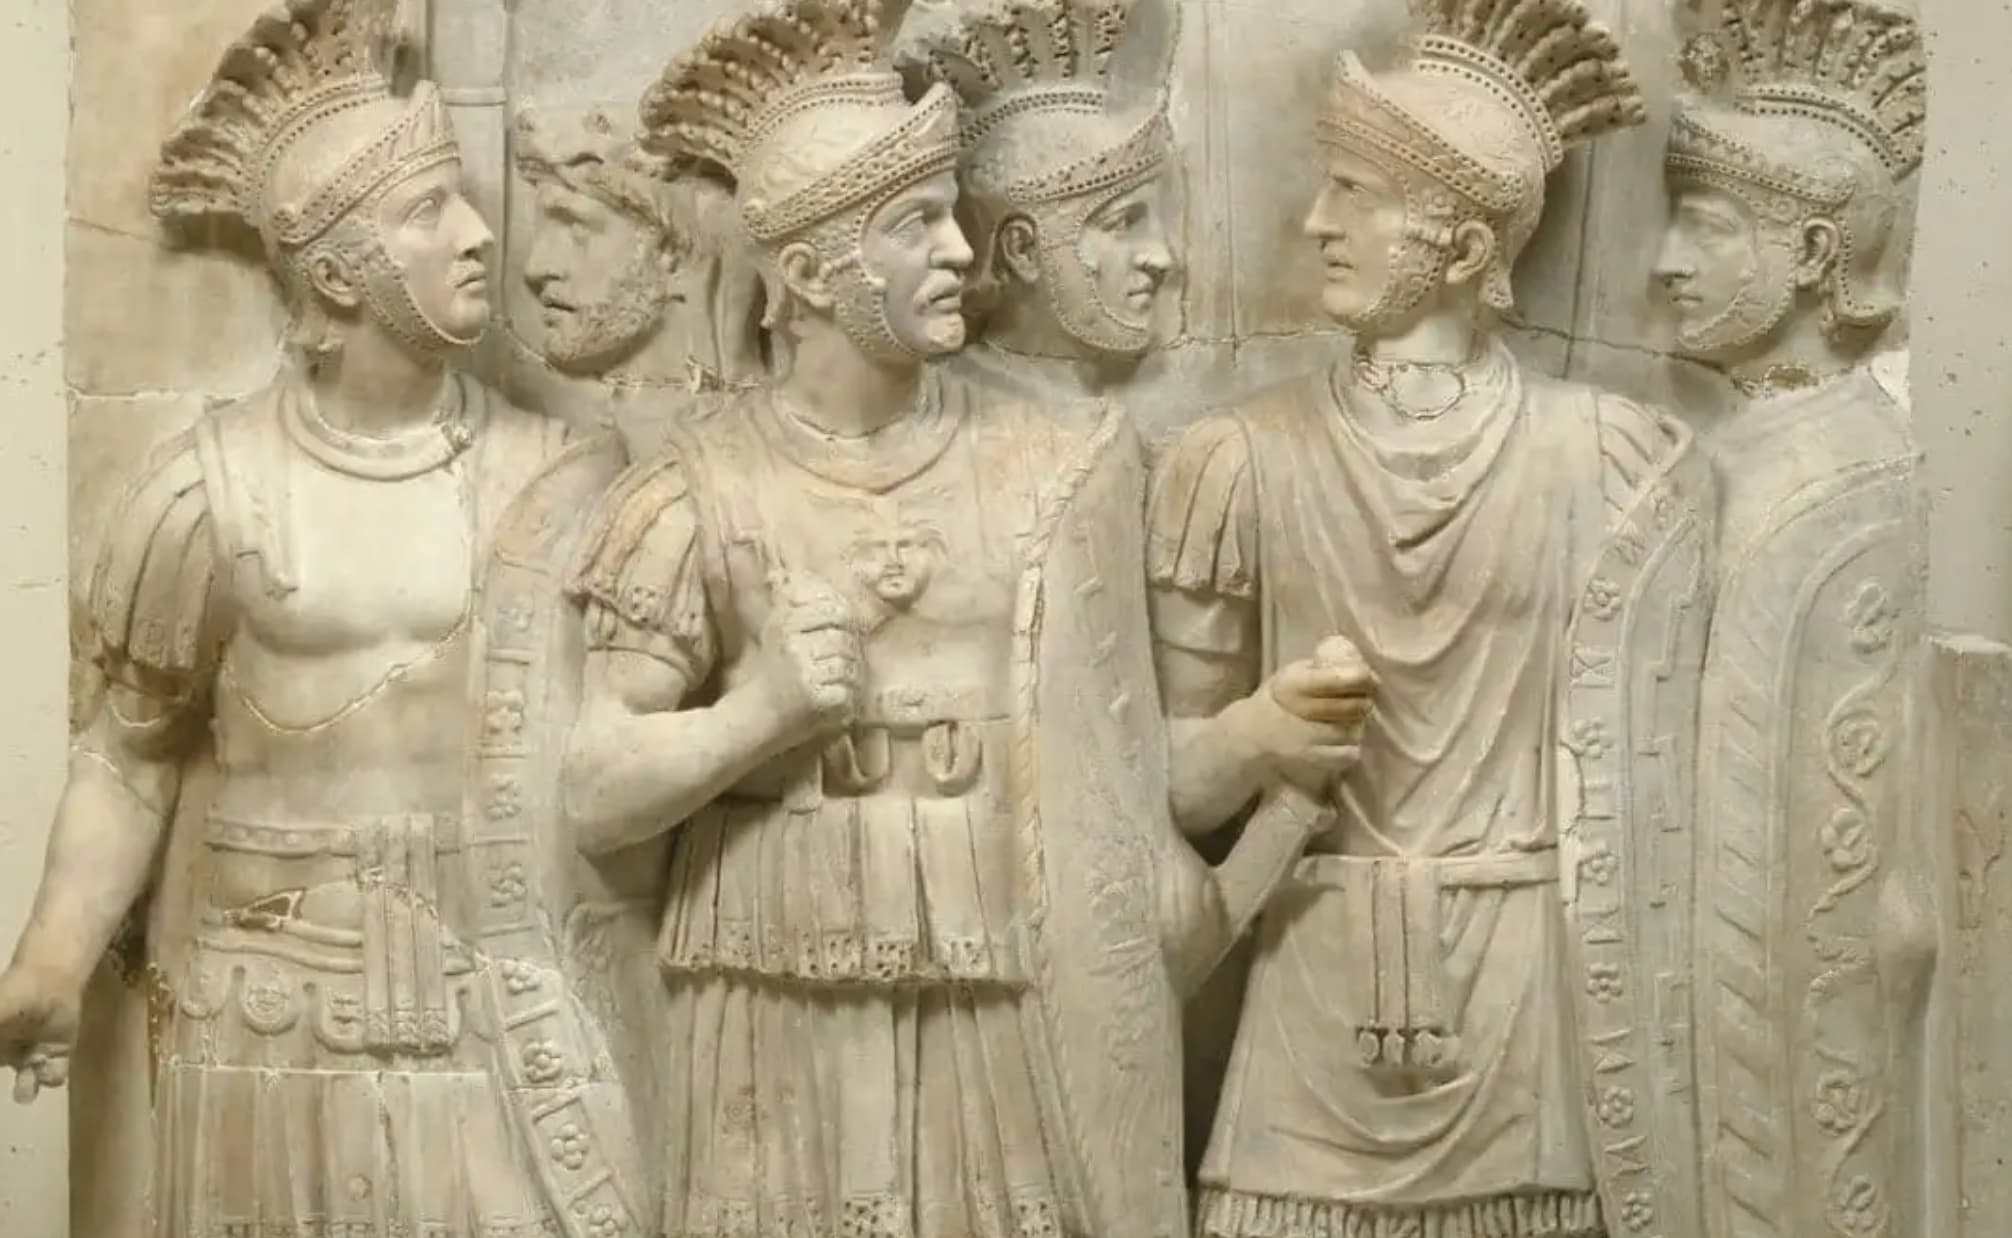 “The Praetorian Guards. I am hard pressed to think of a battle where I hear of them succeeding, but more than a few examples where they were had their tergums handed to them.”